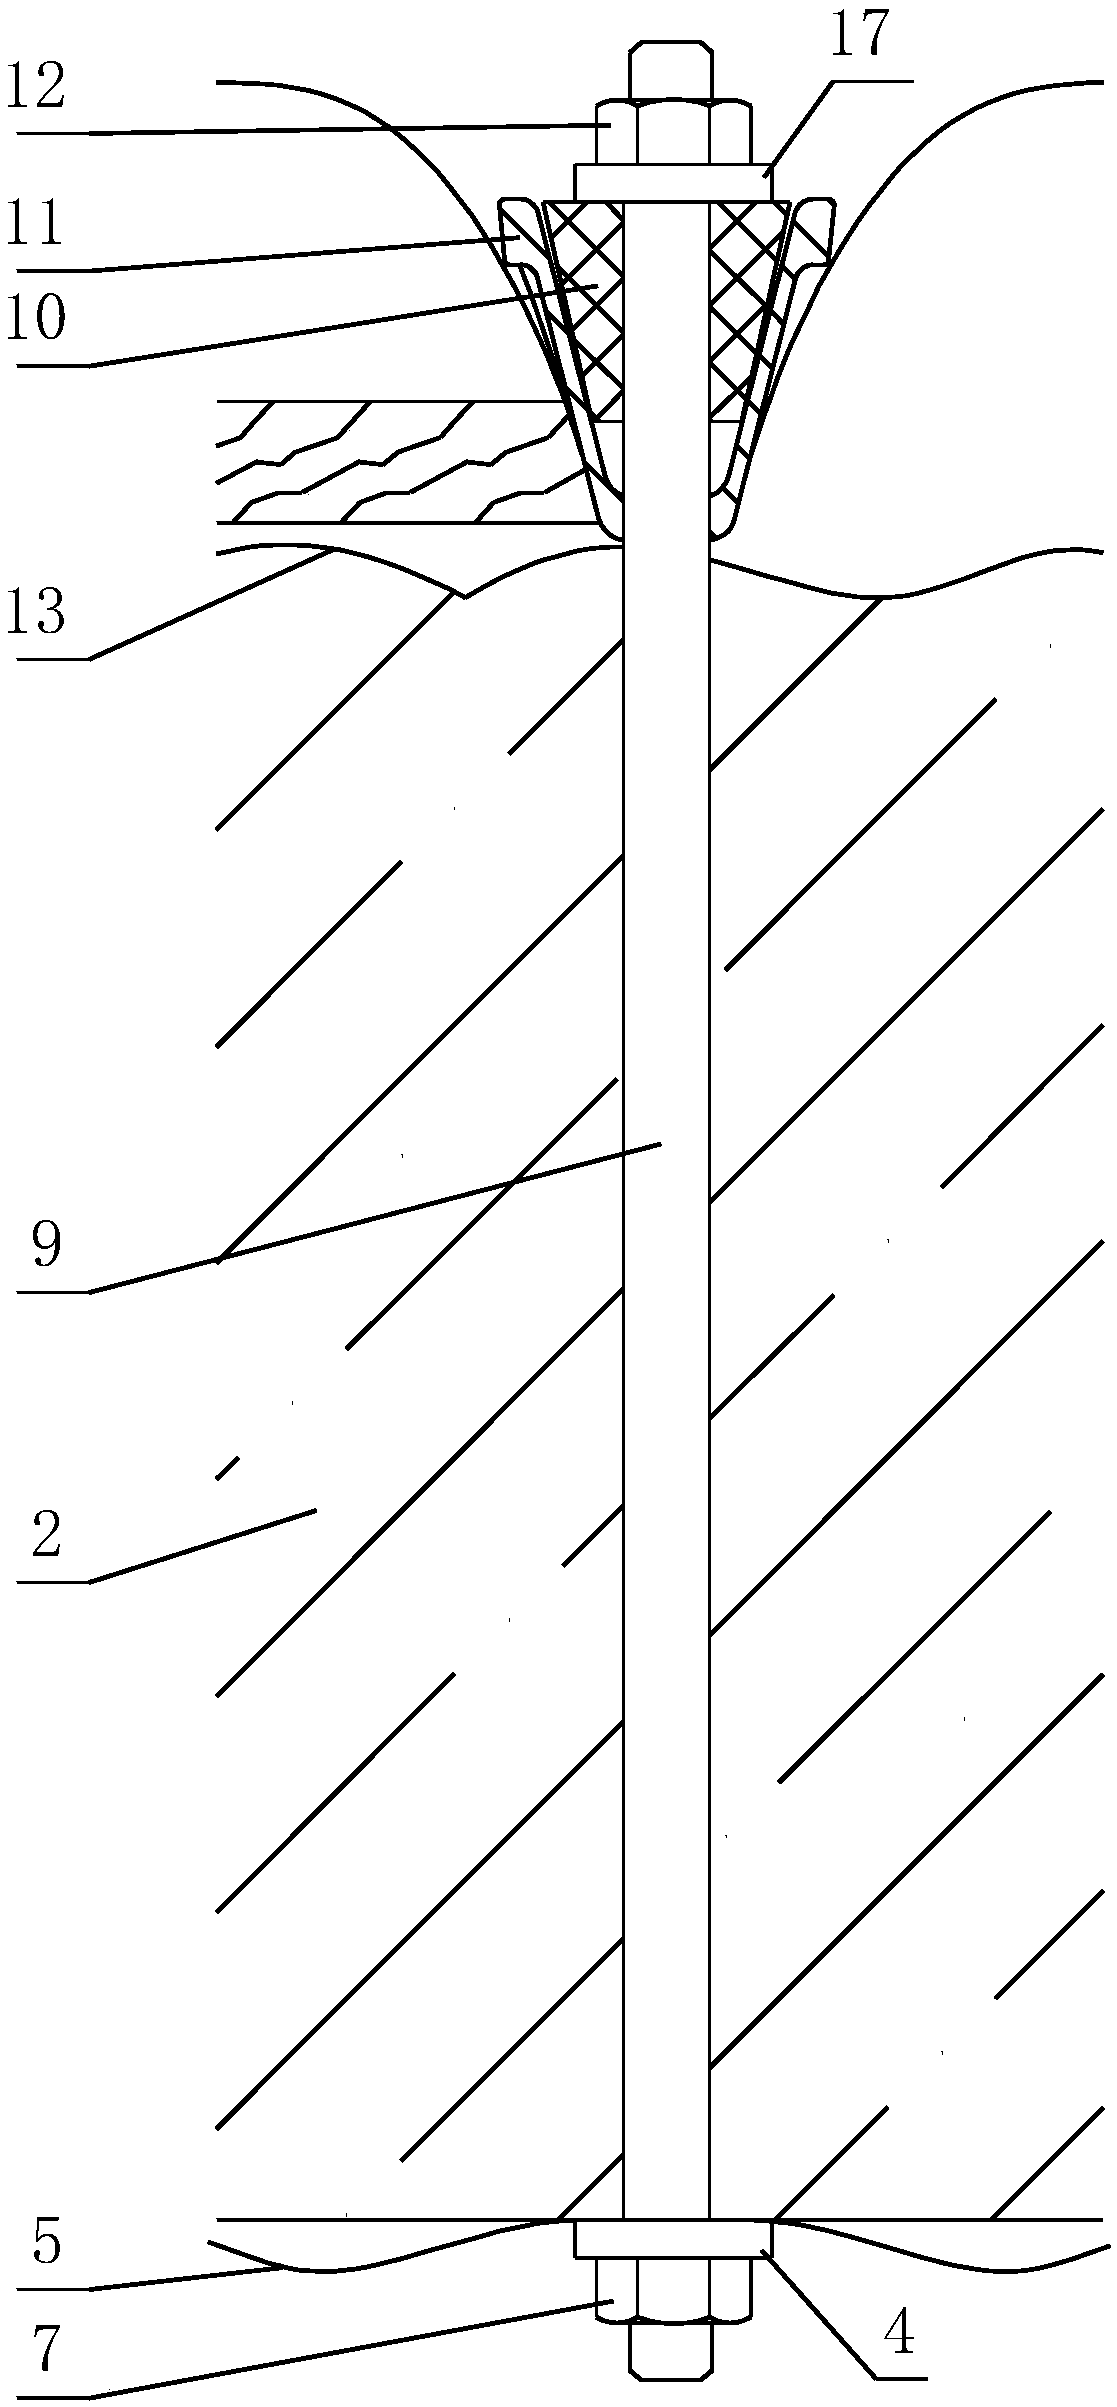 A method for gob-side entry retention with high-water material and thin-wall composite support